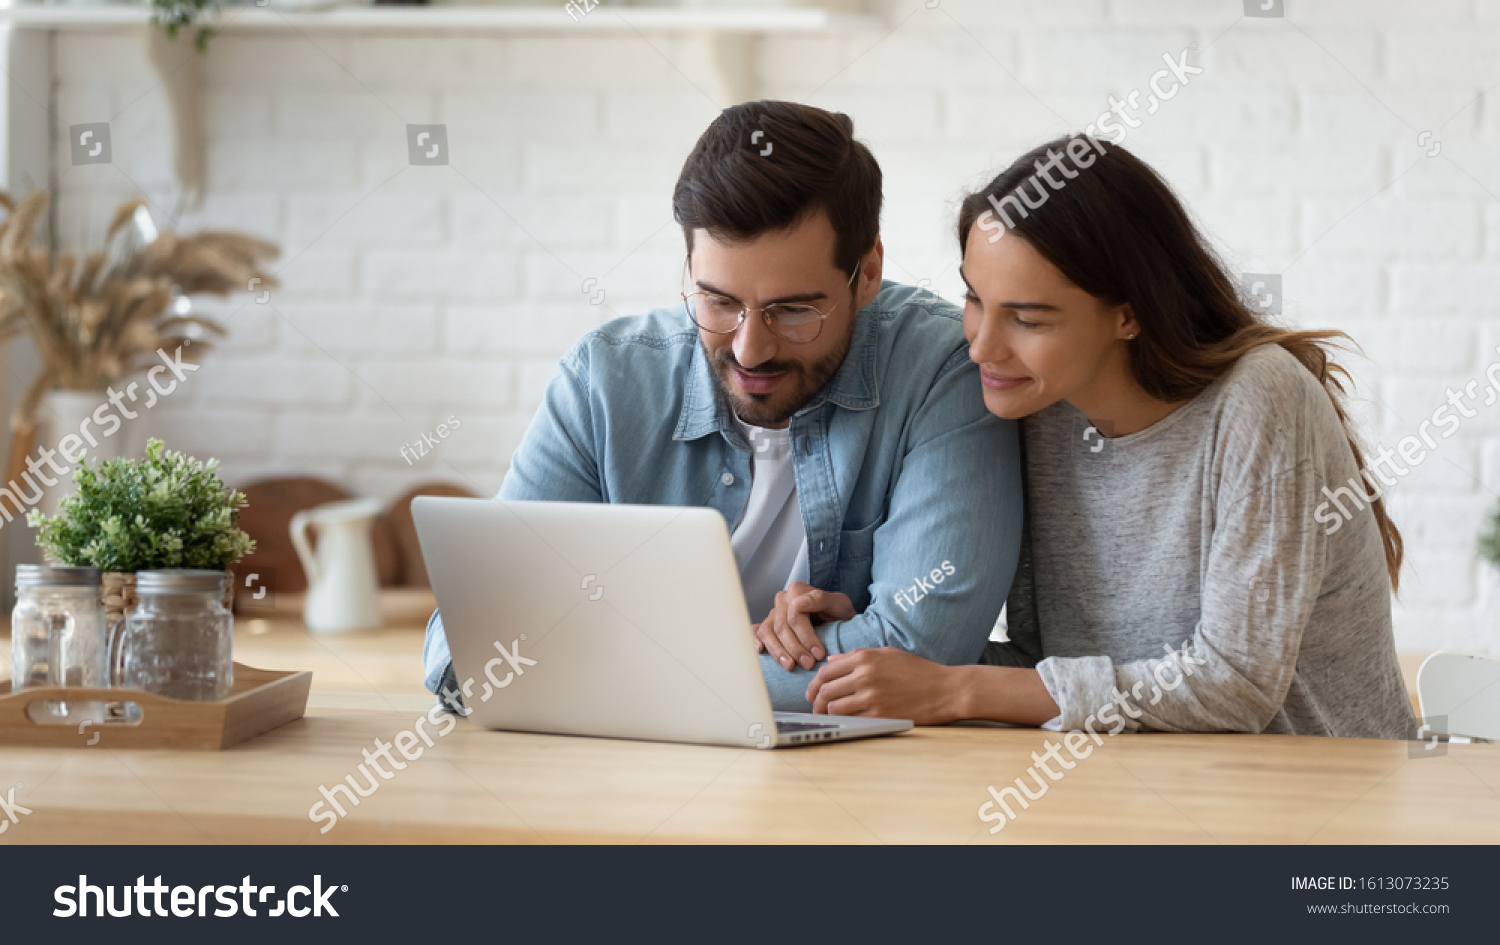 Pleasant family couple sitting at big wooden table in modern kitchen, looking at laptop screen. Happy young mixed race married spouse web surfing, making purchases online or booking flight tickets. #1613073235